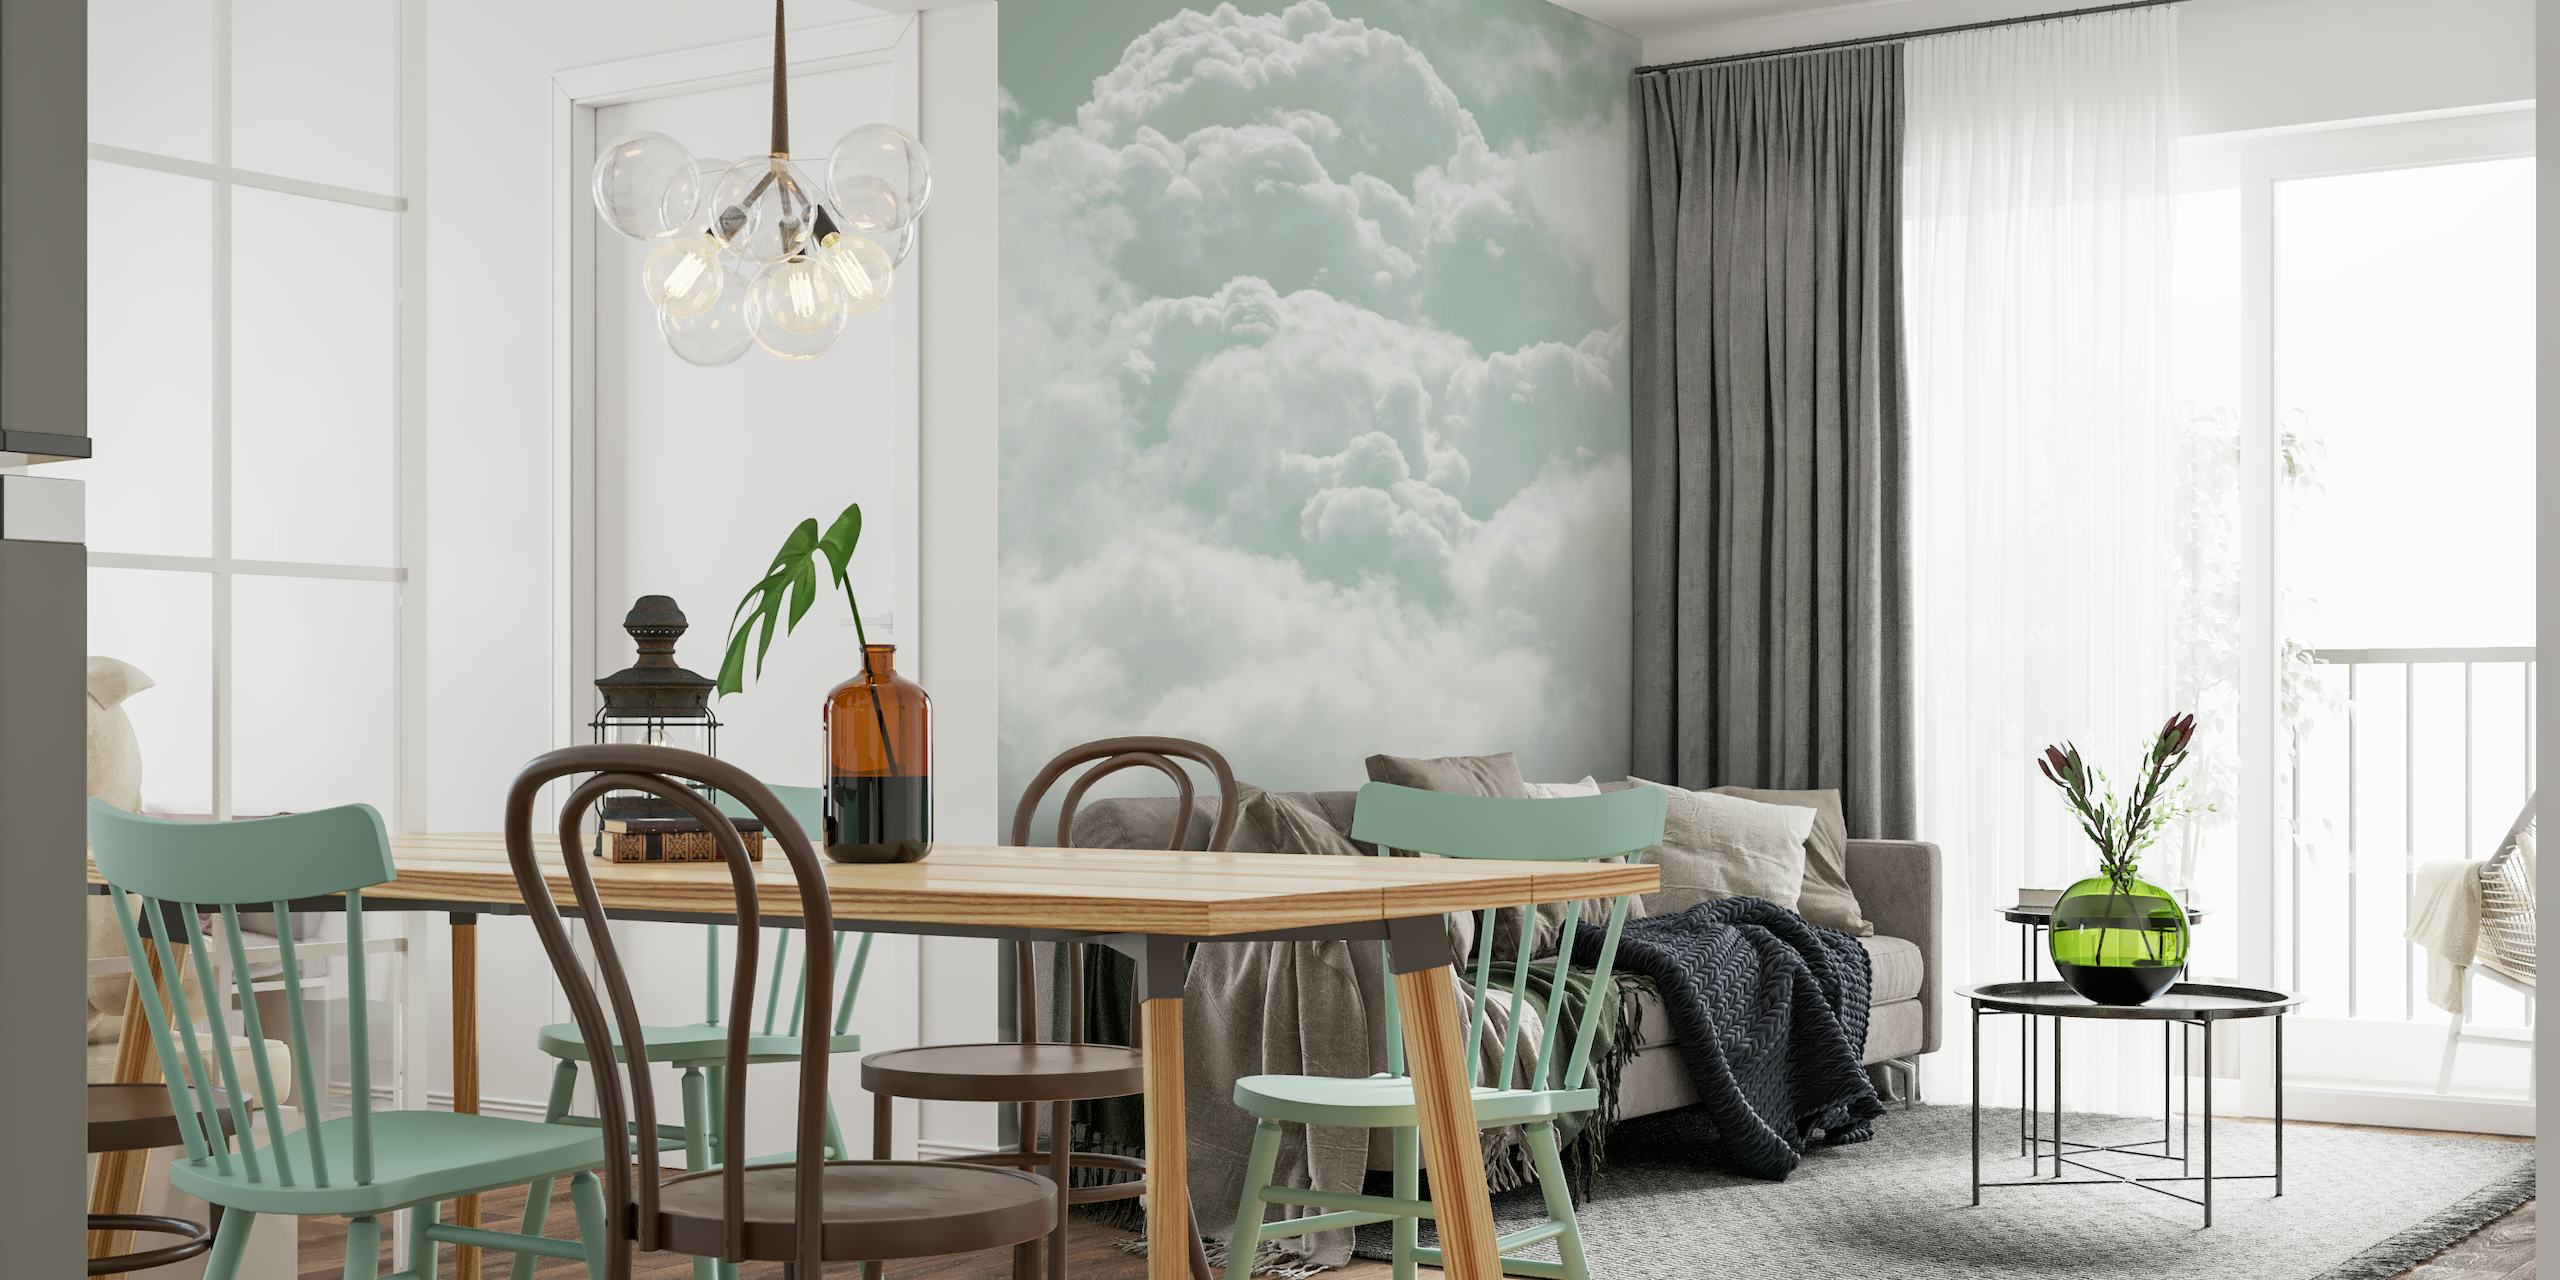 Fluffy white clouds wall mural in shades of blue and white